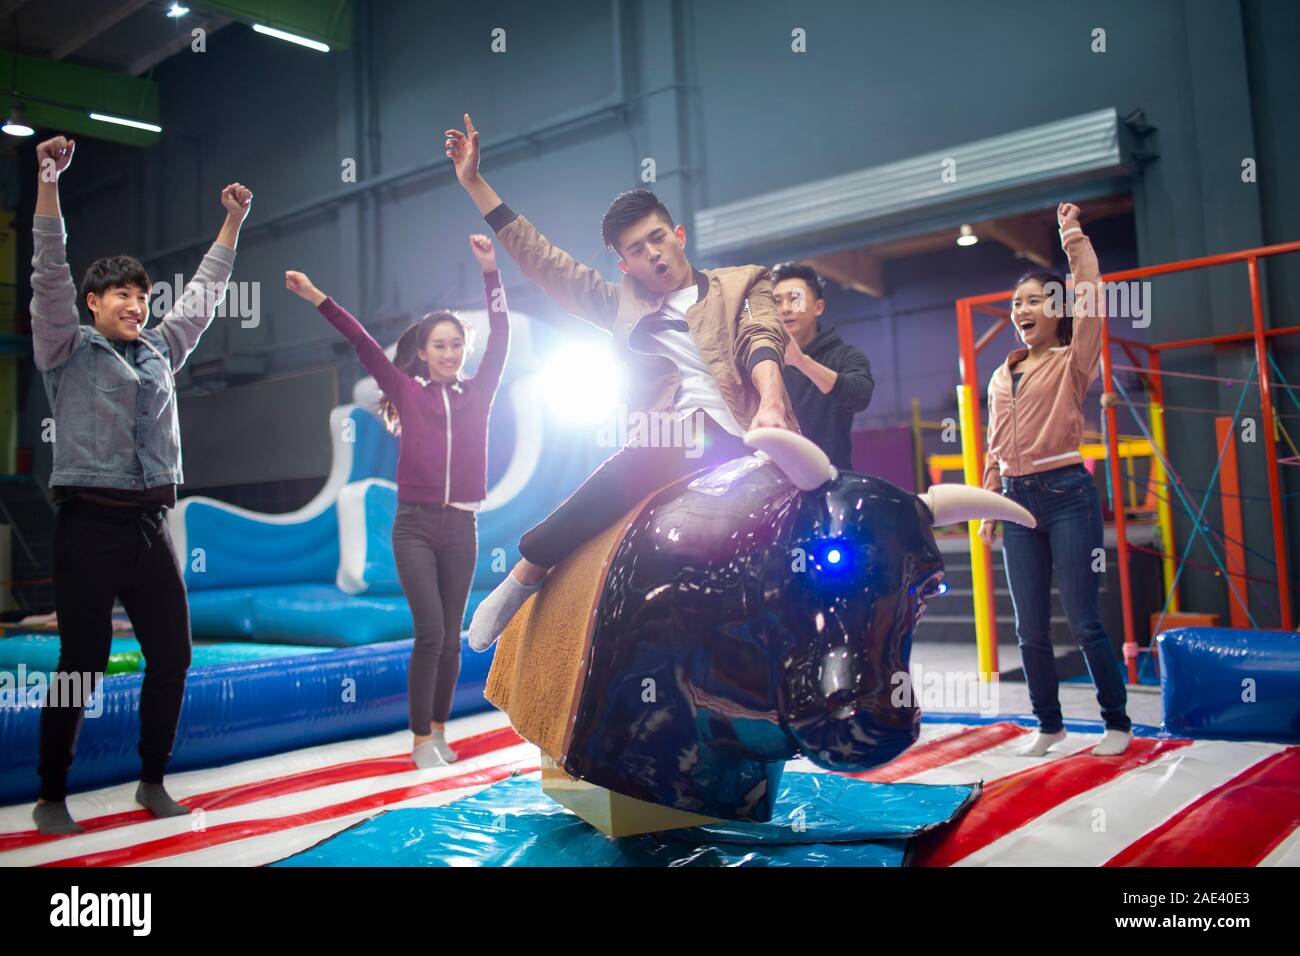 Happy young friends playing mechanical bull game Stock Photo